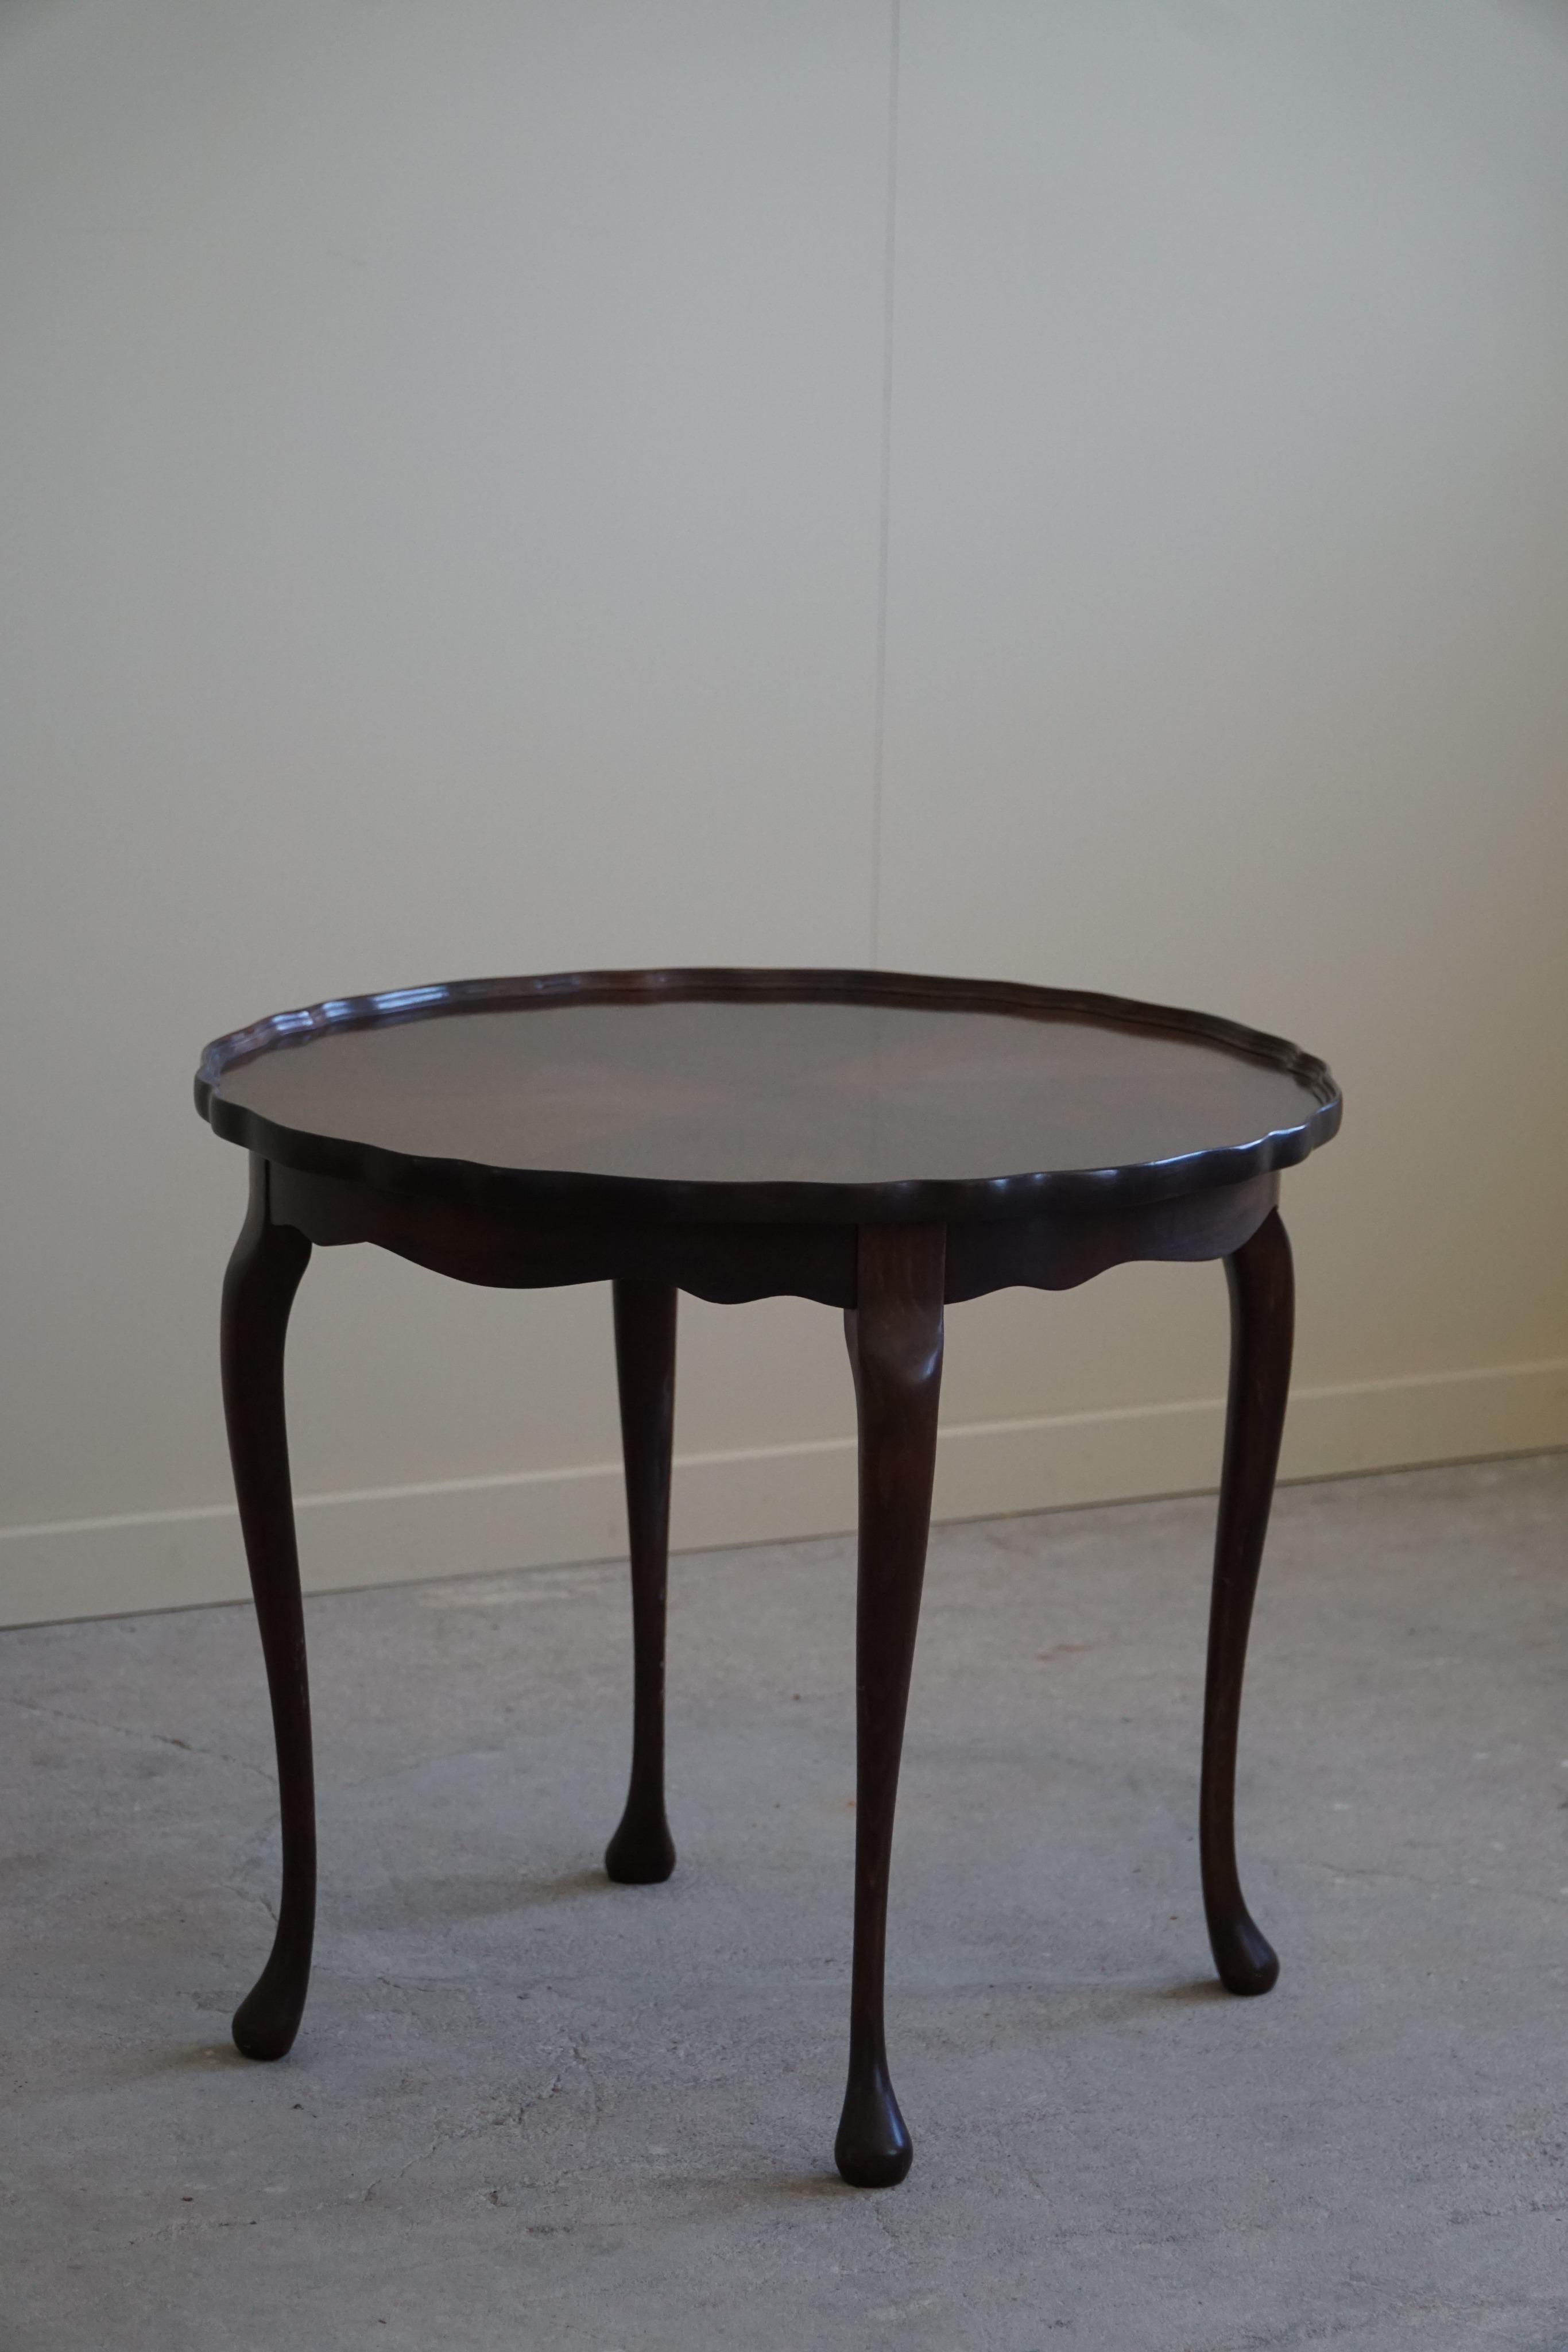 Danish Art Deco Side Table / Coffee Table in Stained Beech, 1940s For Sale 7